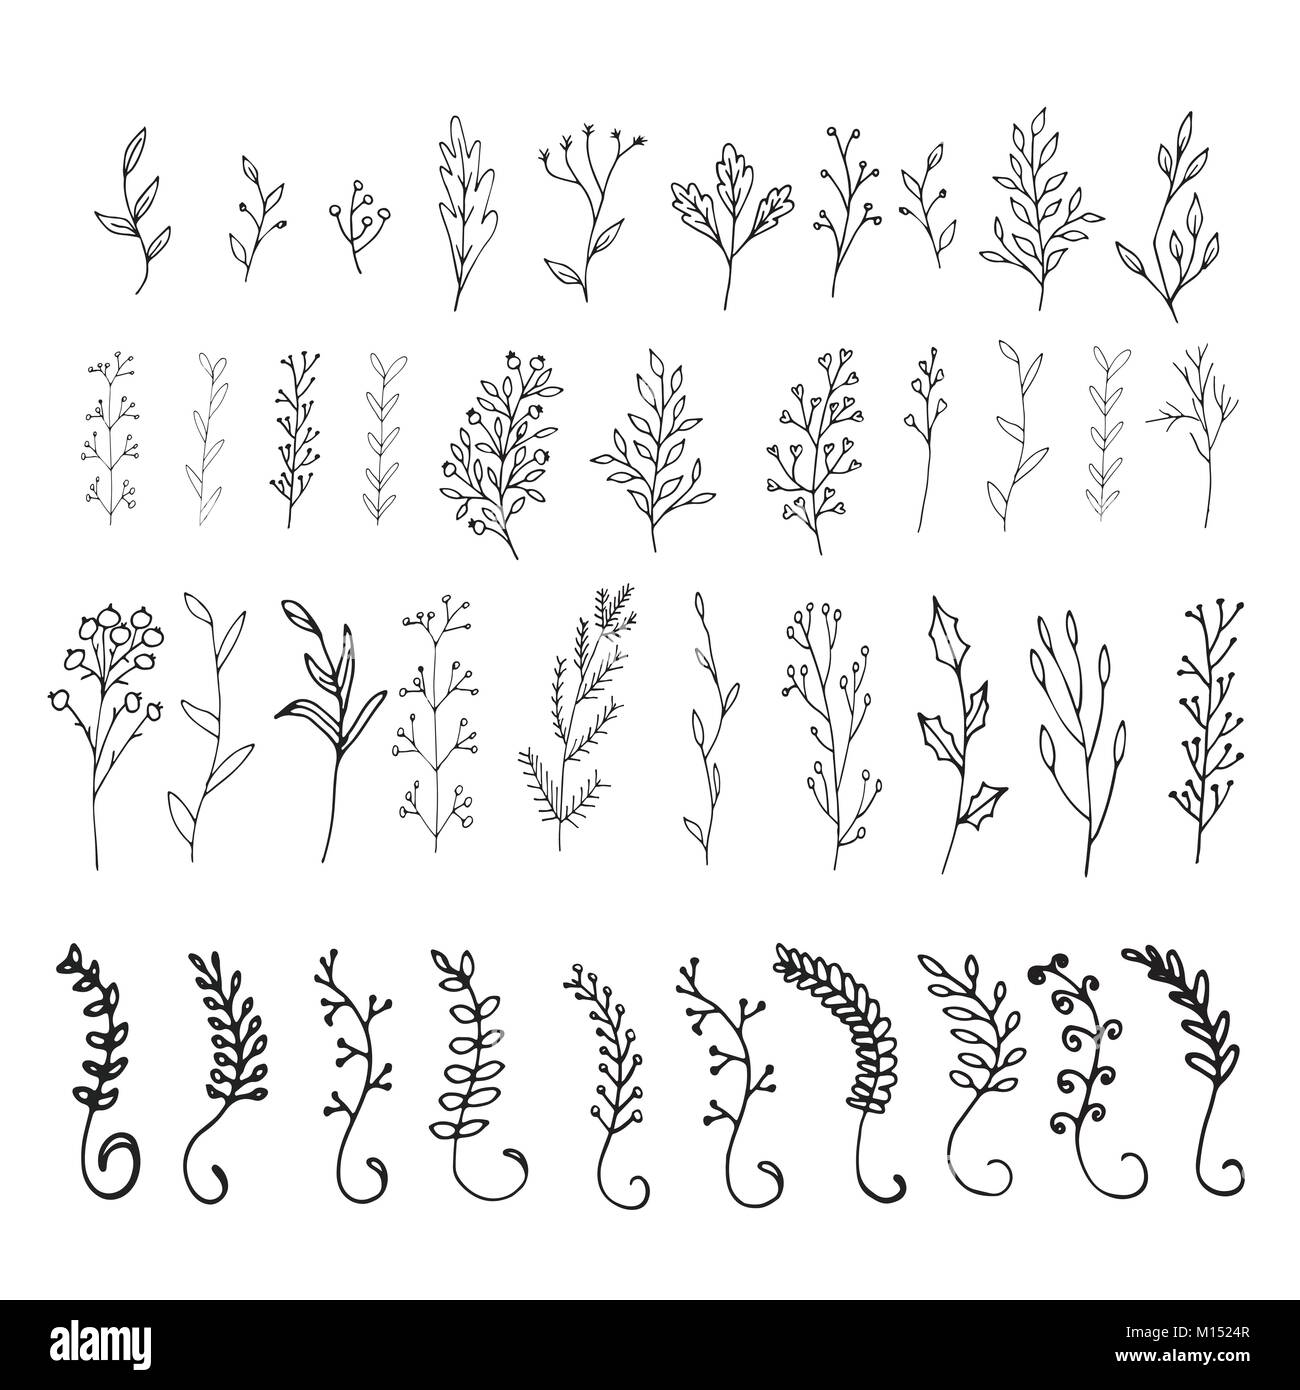 Collection of hand drawn vector florals and branches with leaves, flowers, berries. Modern sketch collection. Decorative elements for design. Ink, vin Stock Vector